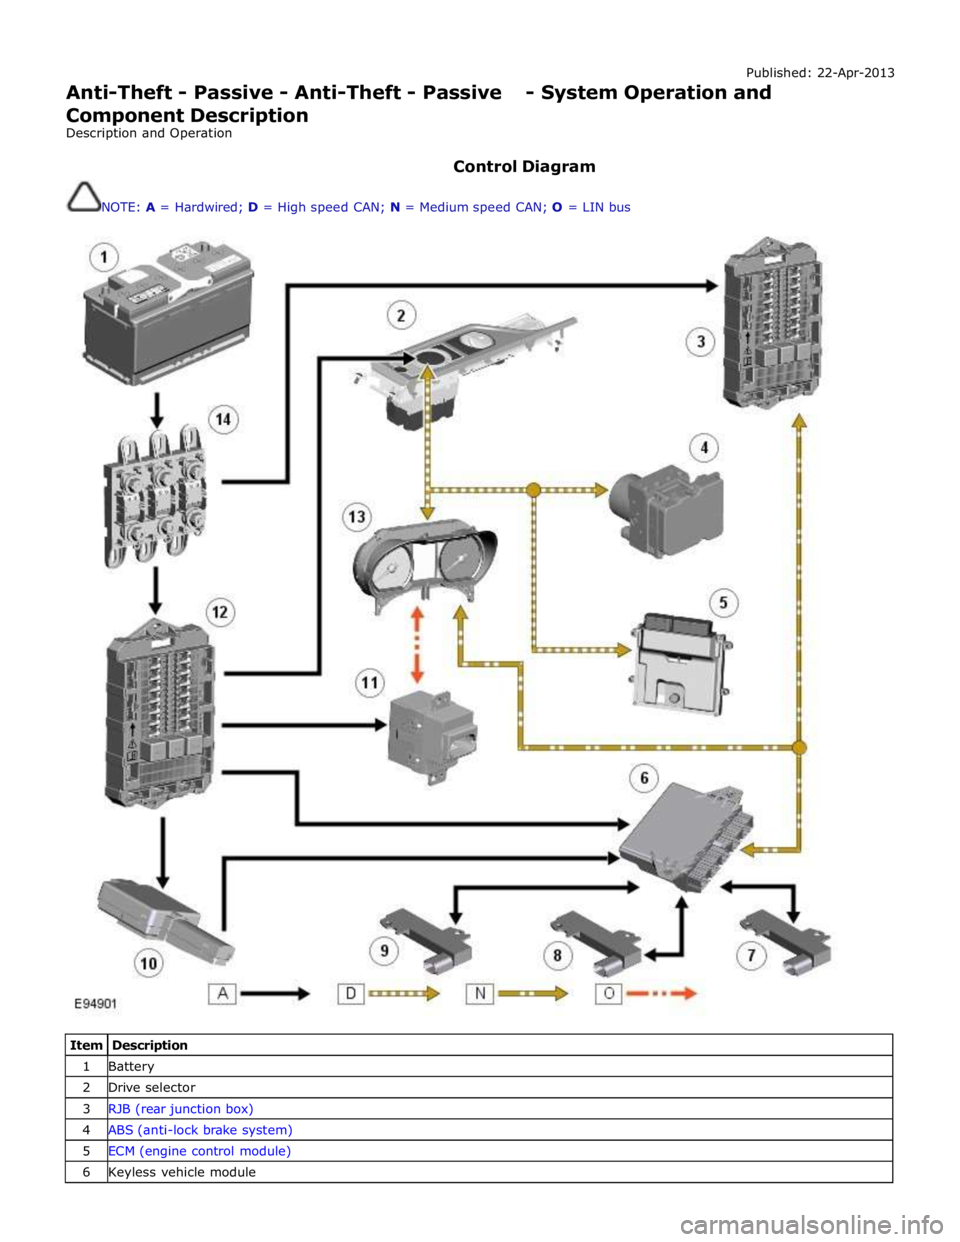 JAGUAR XFR 2010 1.G Workshop Manual Published: 22-Apr-2013 
Anti-Theft - Passive - Anti-Theft - Passive - System Operation and 
Component Description 
Description and Operation 
 
Control Diagram 
 
NOTE: A = Hardwired; D = High speed C